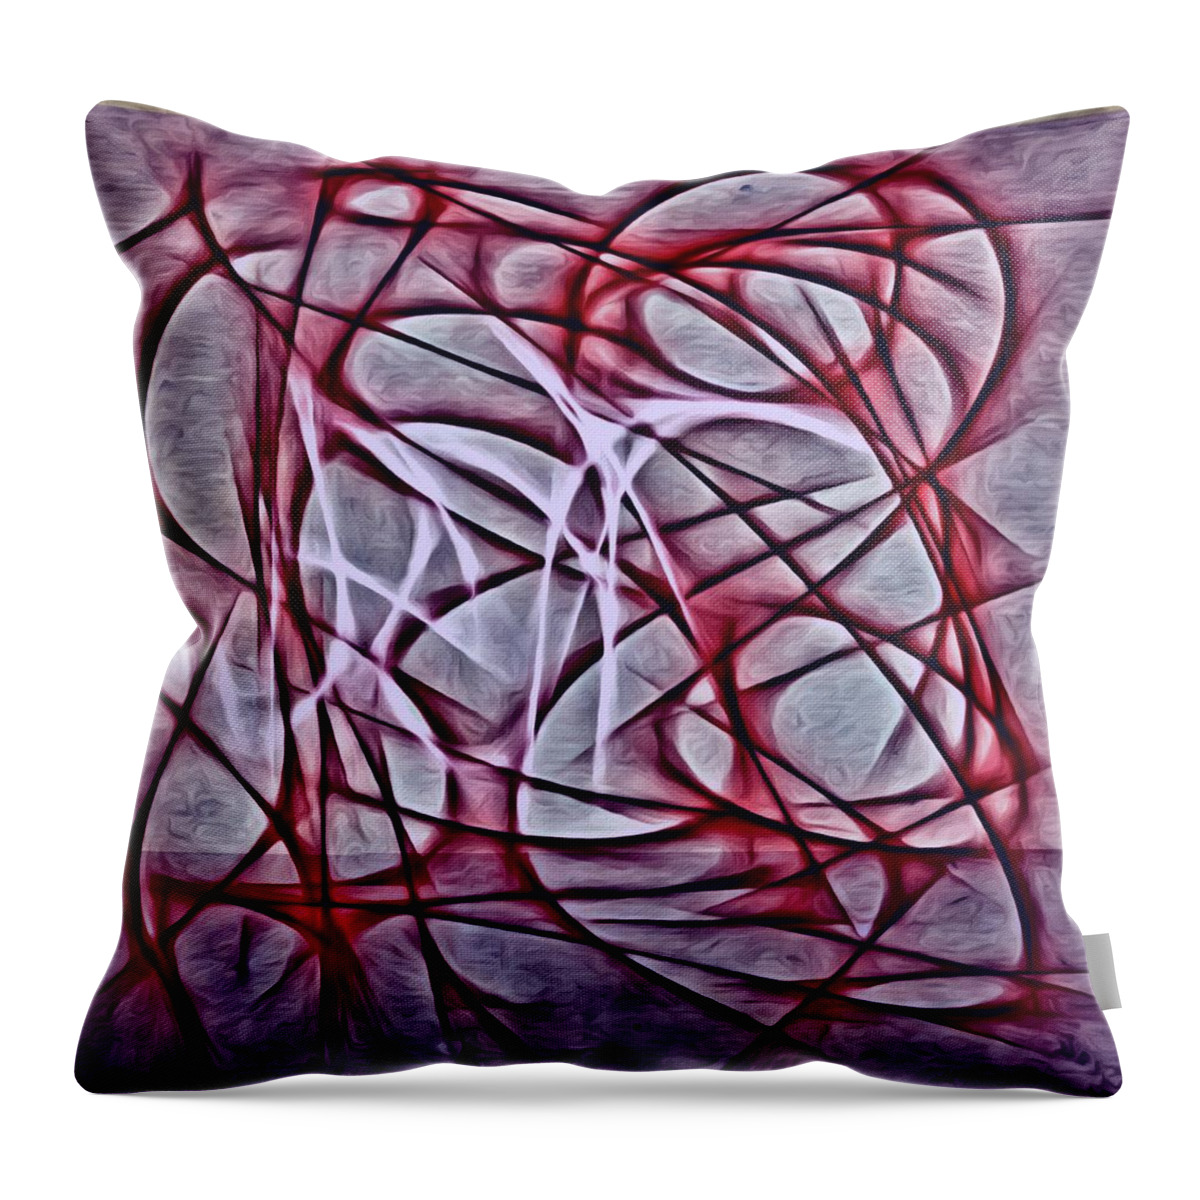 Abstract Throw Pillow featuring the mixed media The Saving Angel's by Marian Lonzetta